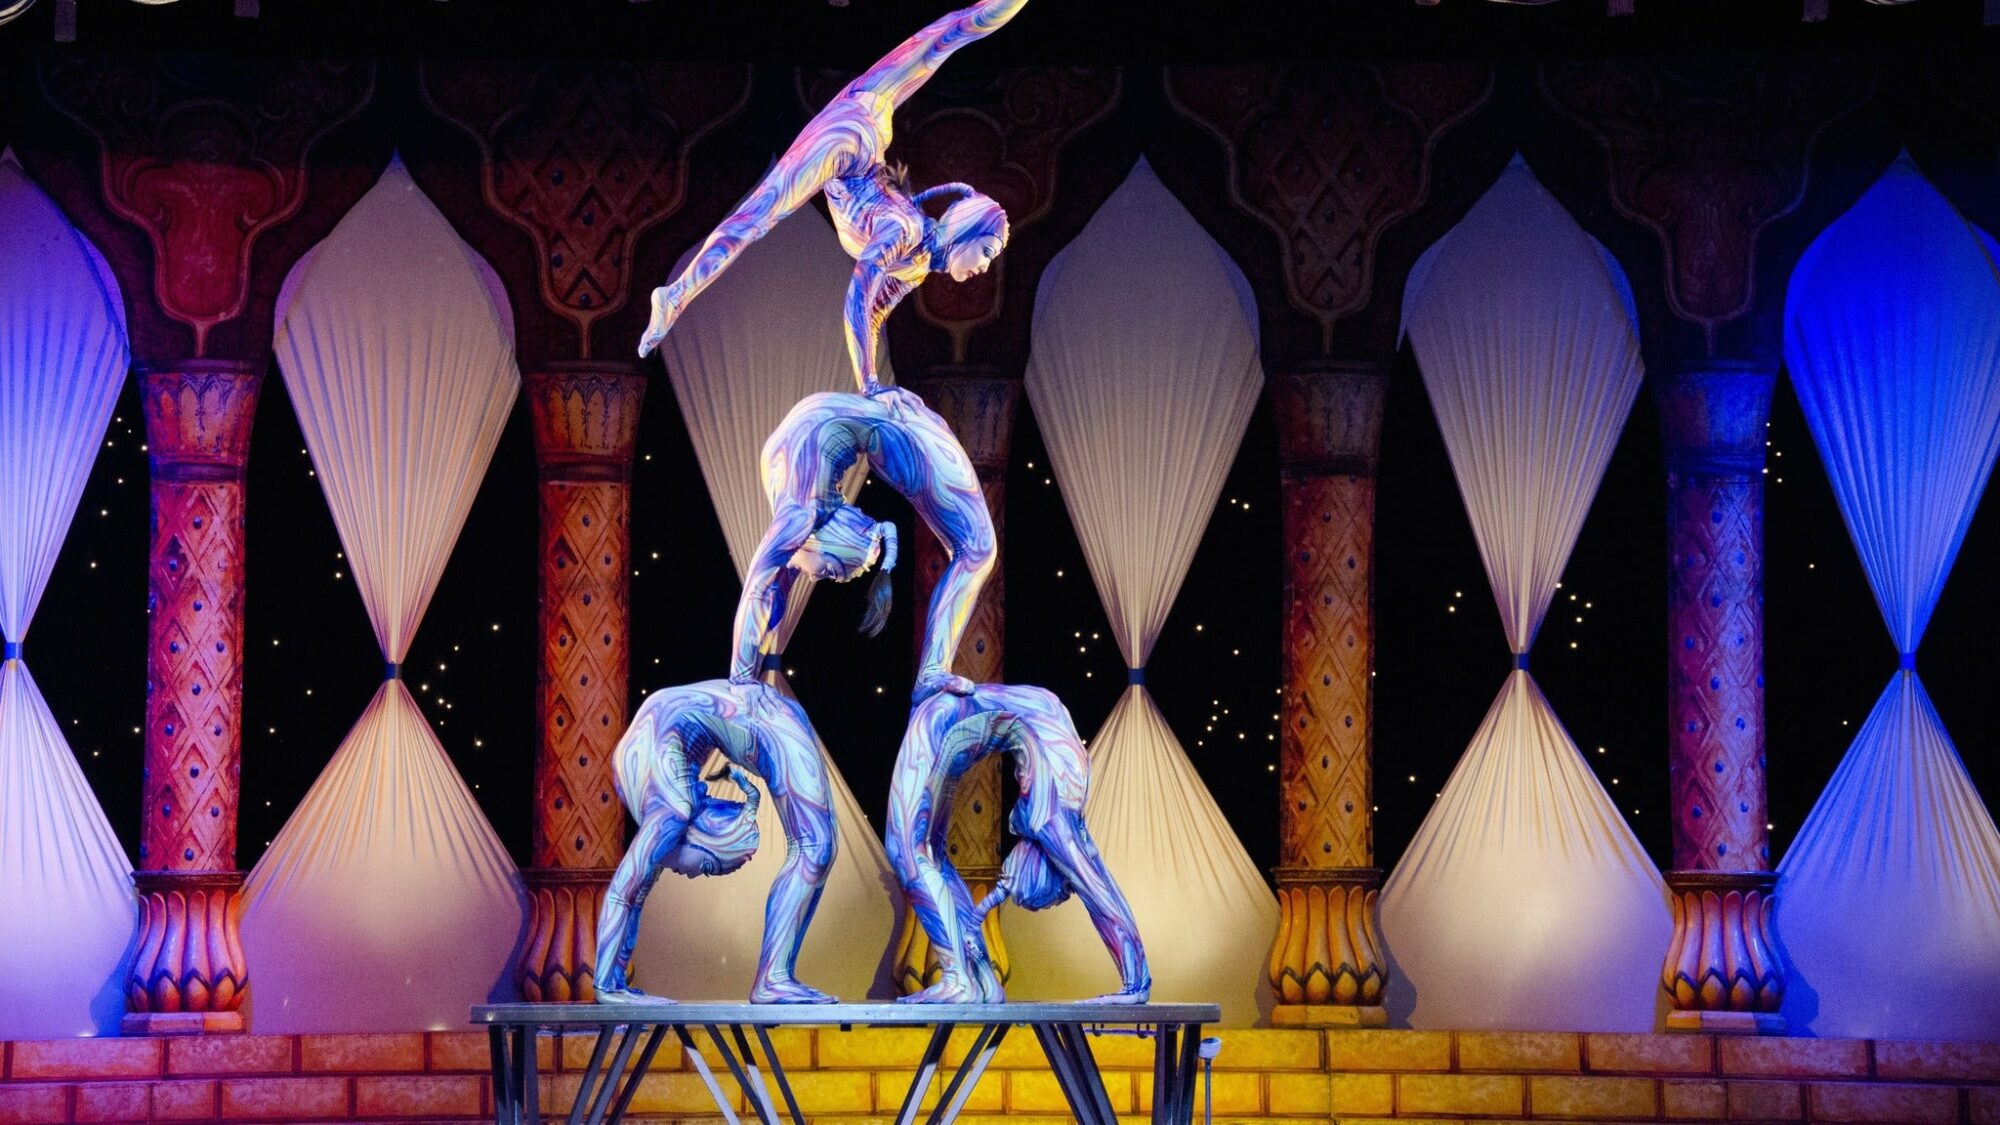 Image name Cirque the Greatest Show at Scarborough Spa Grand Hall Scarborough the 1 image from the post Cirque: The Greatest Show- Matinee at Scarborough Spa Grand Hall, Scarborough in Yorkshire.com.